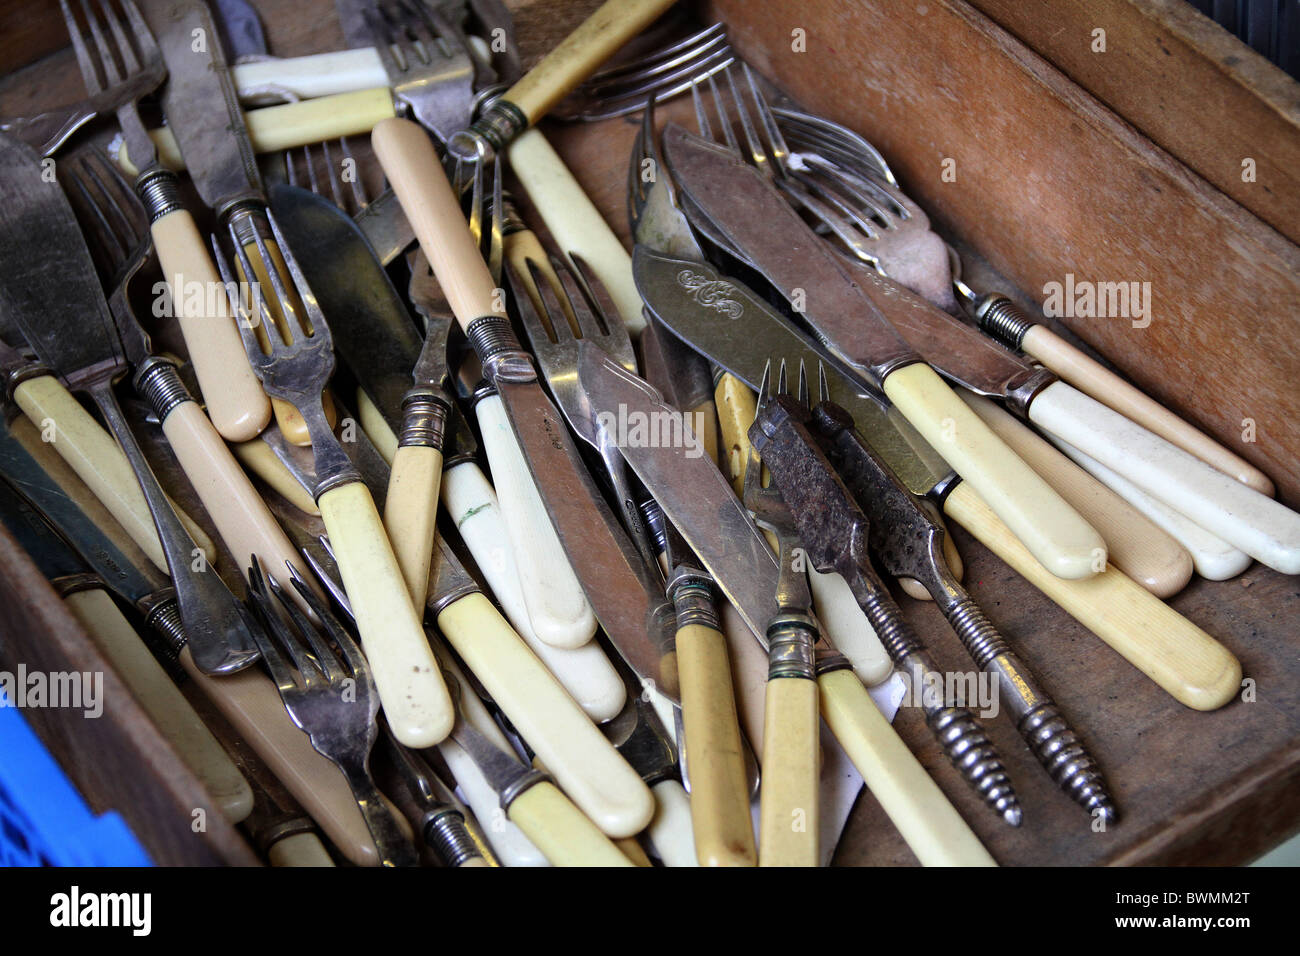 Old cutlery in a box for sale outside a junk shop. Stock Photo